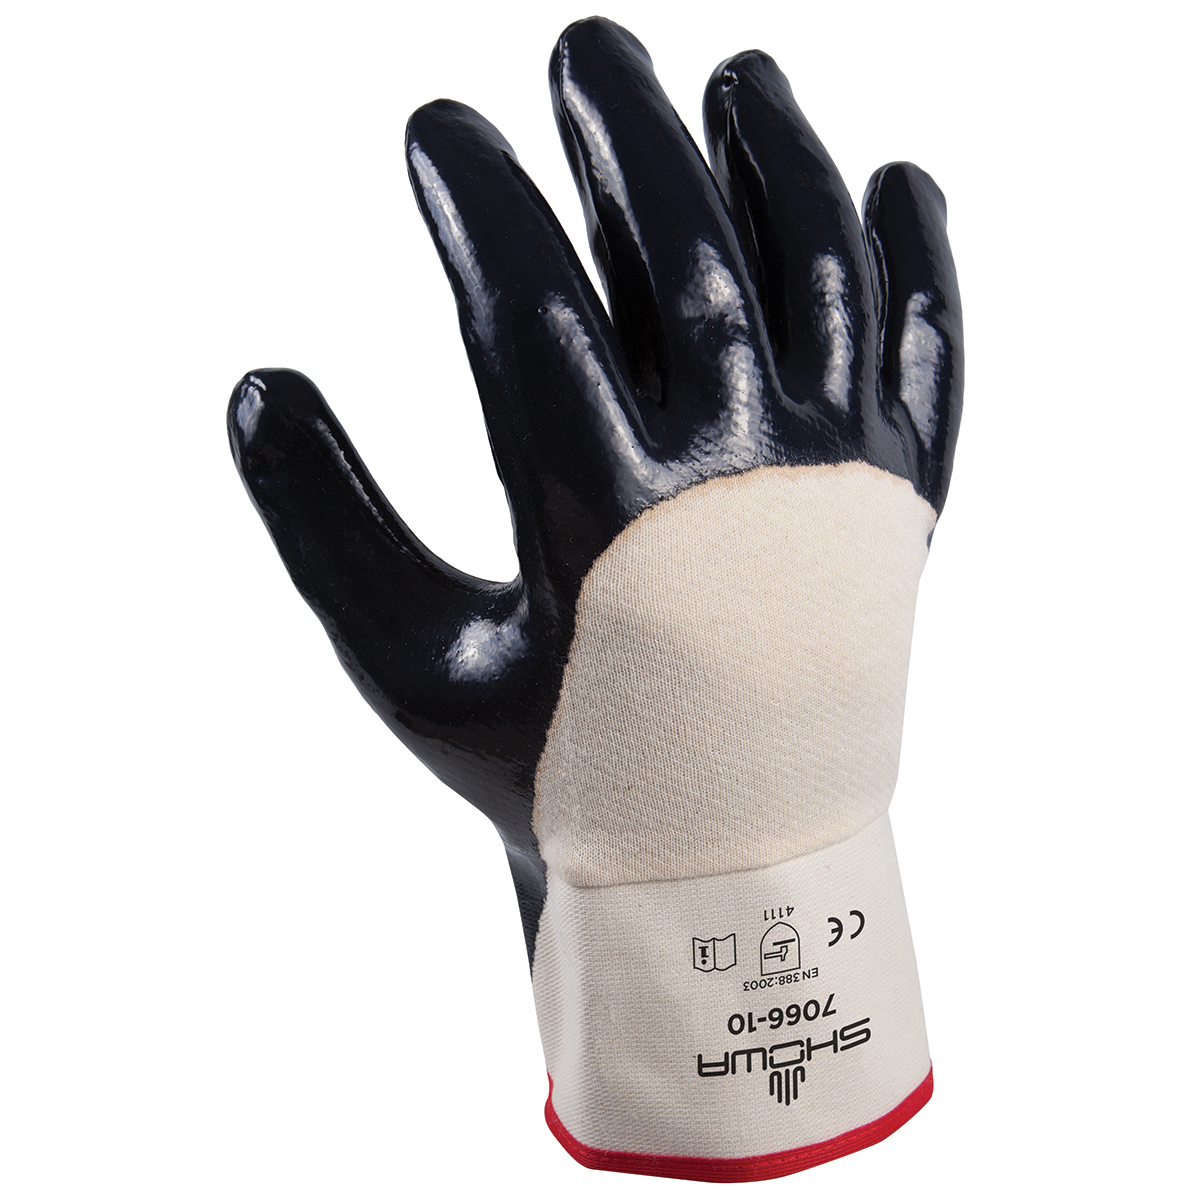 General purpose nitrile-coated, white w/navy dip, palm-coated rubberized safety cuff, large